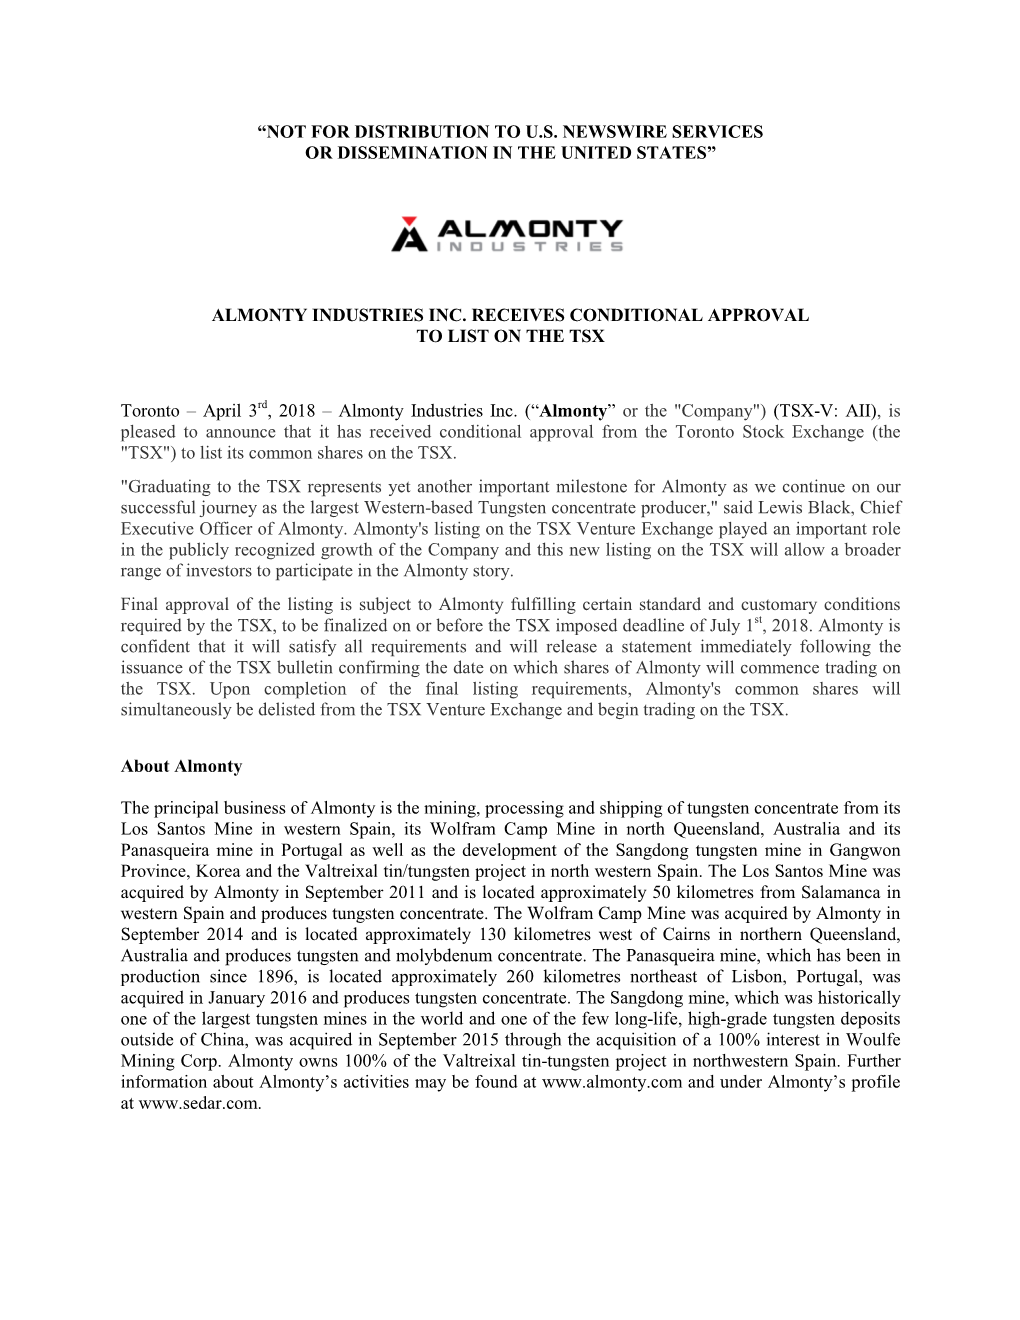 Almonty Industries Inc. Receives Conditional Approval to List on the Tsx